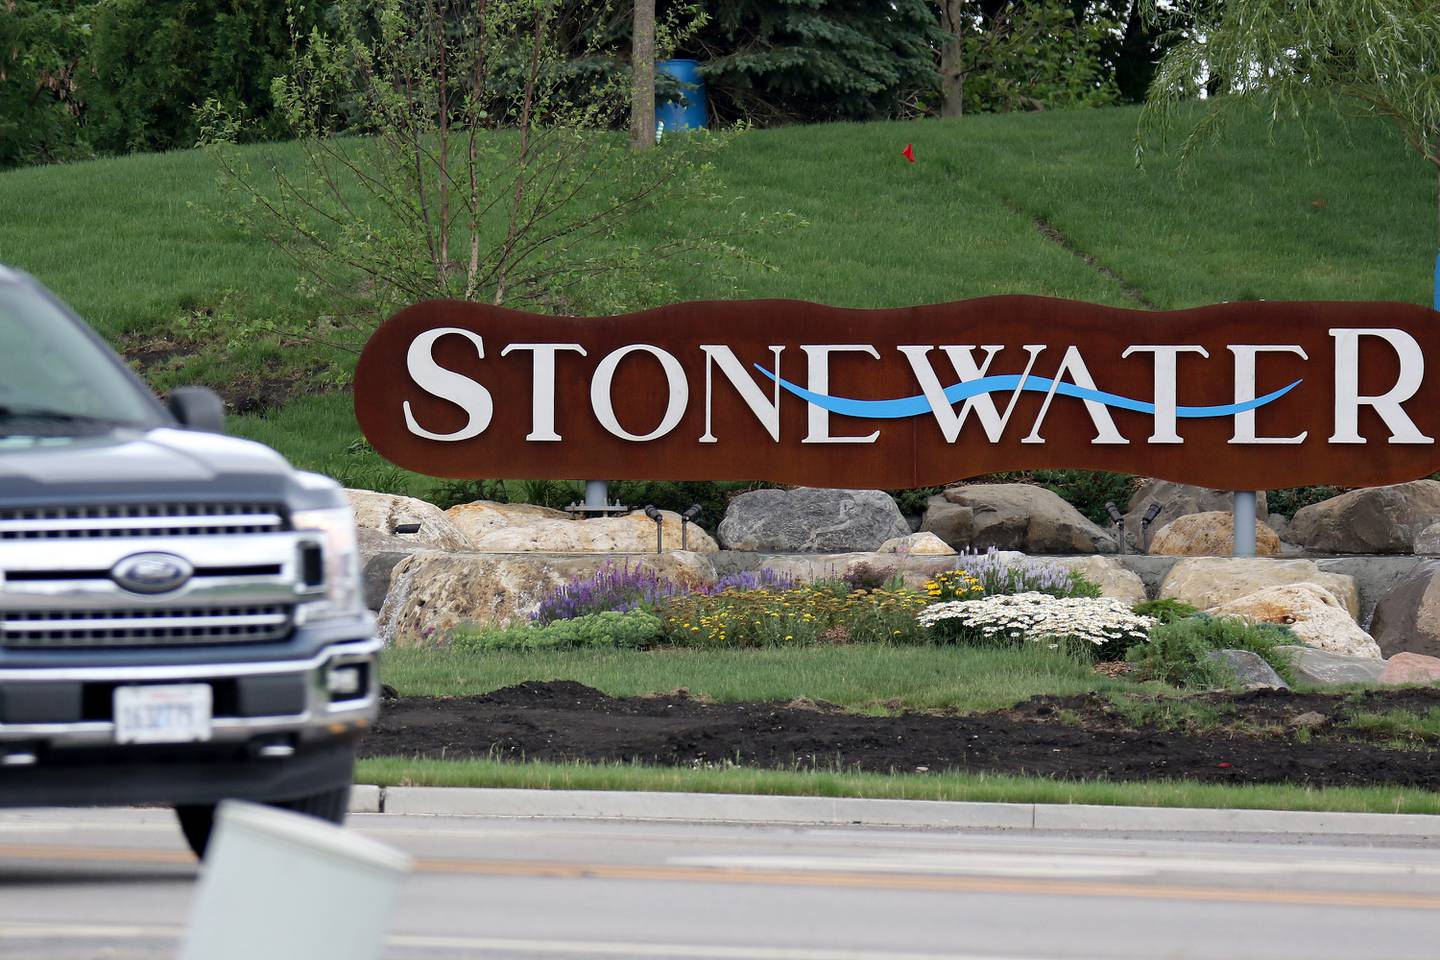 Construction continues in the Stonewater subdivision in Wonder Lake in a June 2021 file photo.